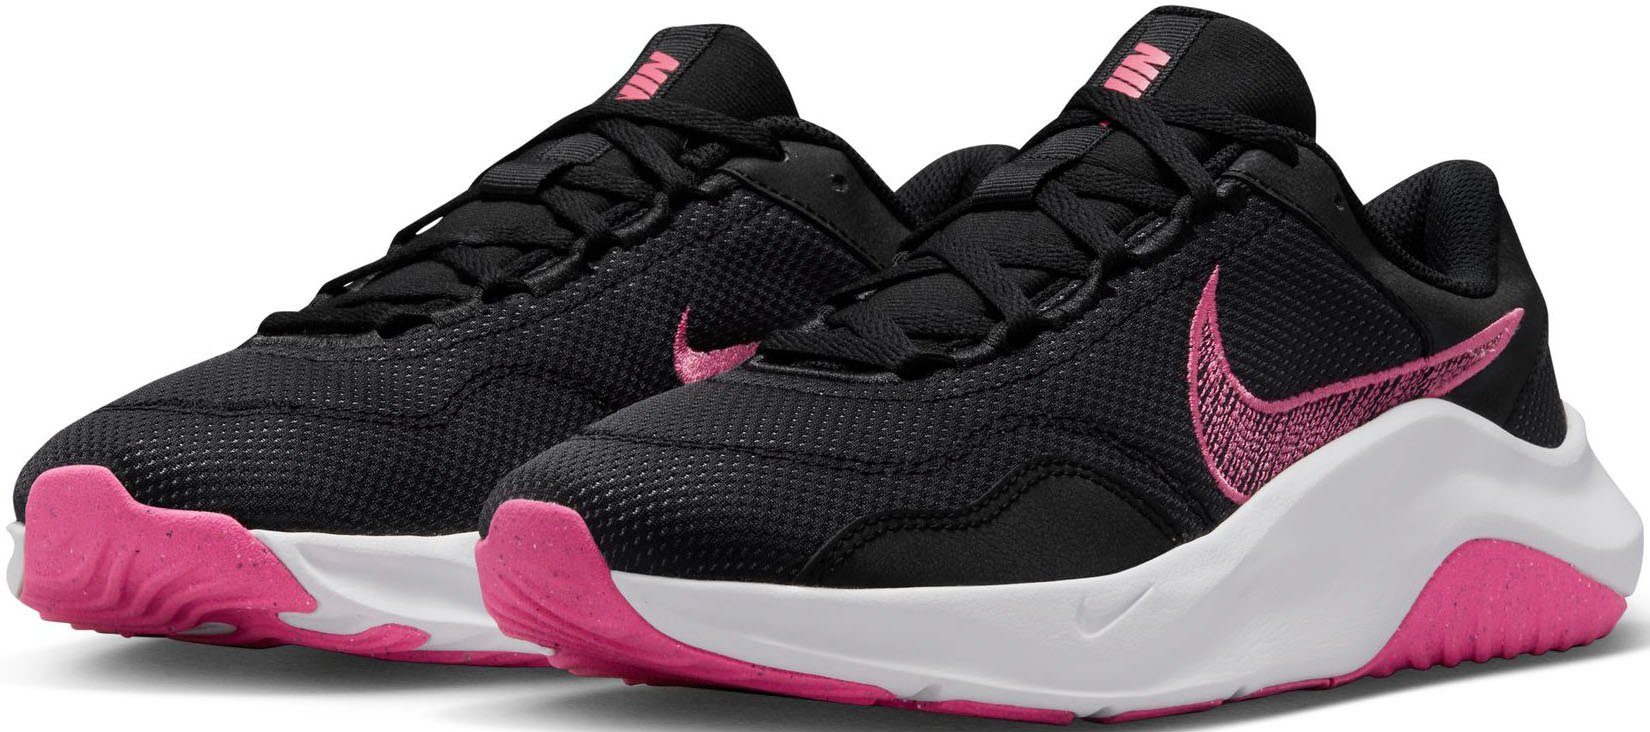 3 LEGEND BLACK-PINKSICLE-PARTICLE-GREY ESSENTIAL Nike Fitnessschuh